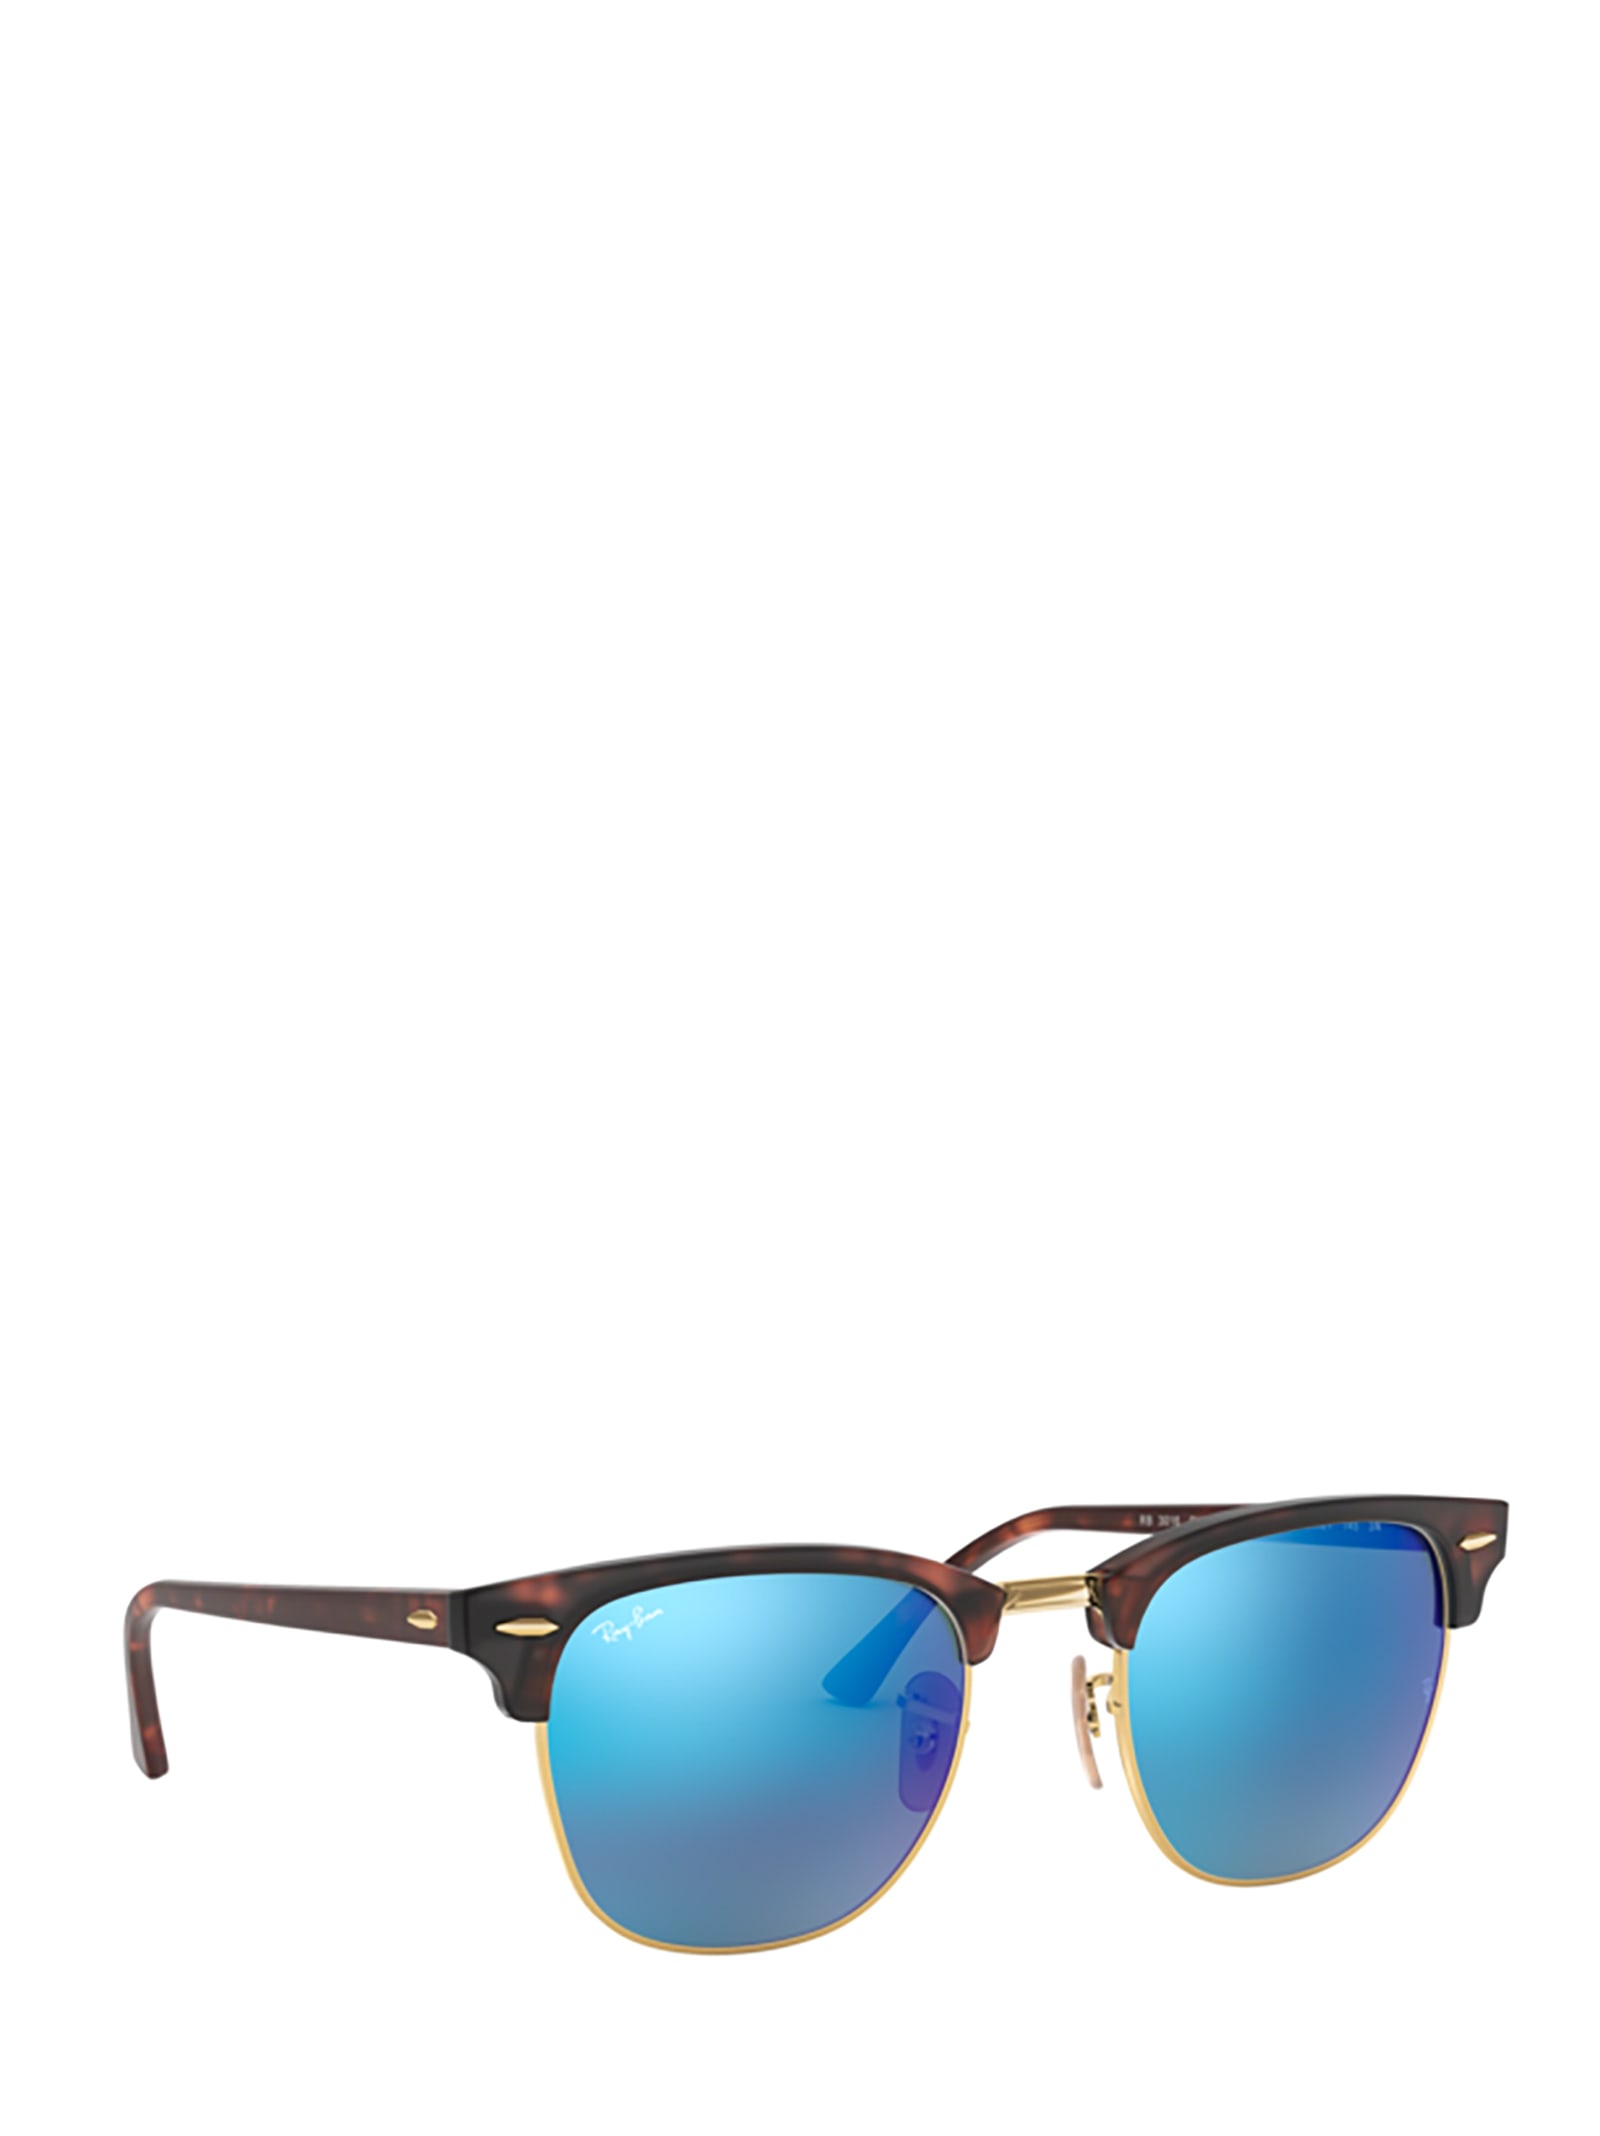 beneden Afm Groen Ray Ban Ray-ban Unisex Sunglasses, Rb3016 51 Clubmaster Mineral Flash  Lenses In Blue,grey,tortoise | ModeSens